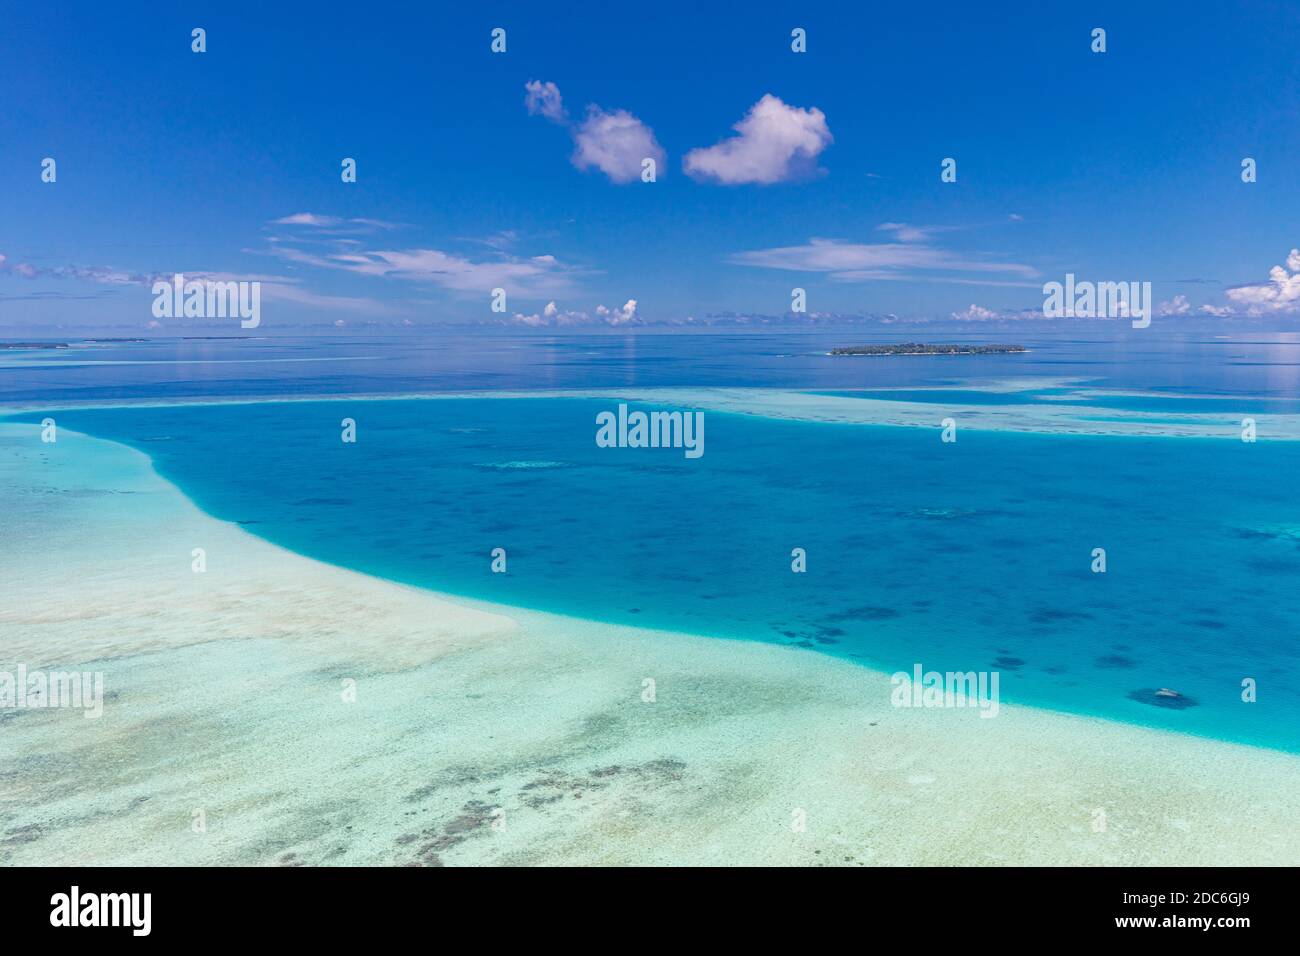 Aerial view on tropical islands. Maldives island, coral reef, picturesque nature landscape, seascape. Amazingly beautiful aerial drone view Stock Photo